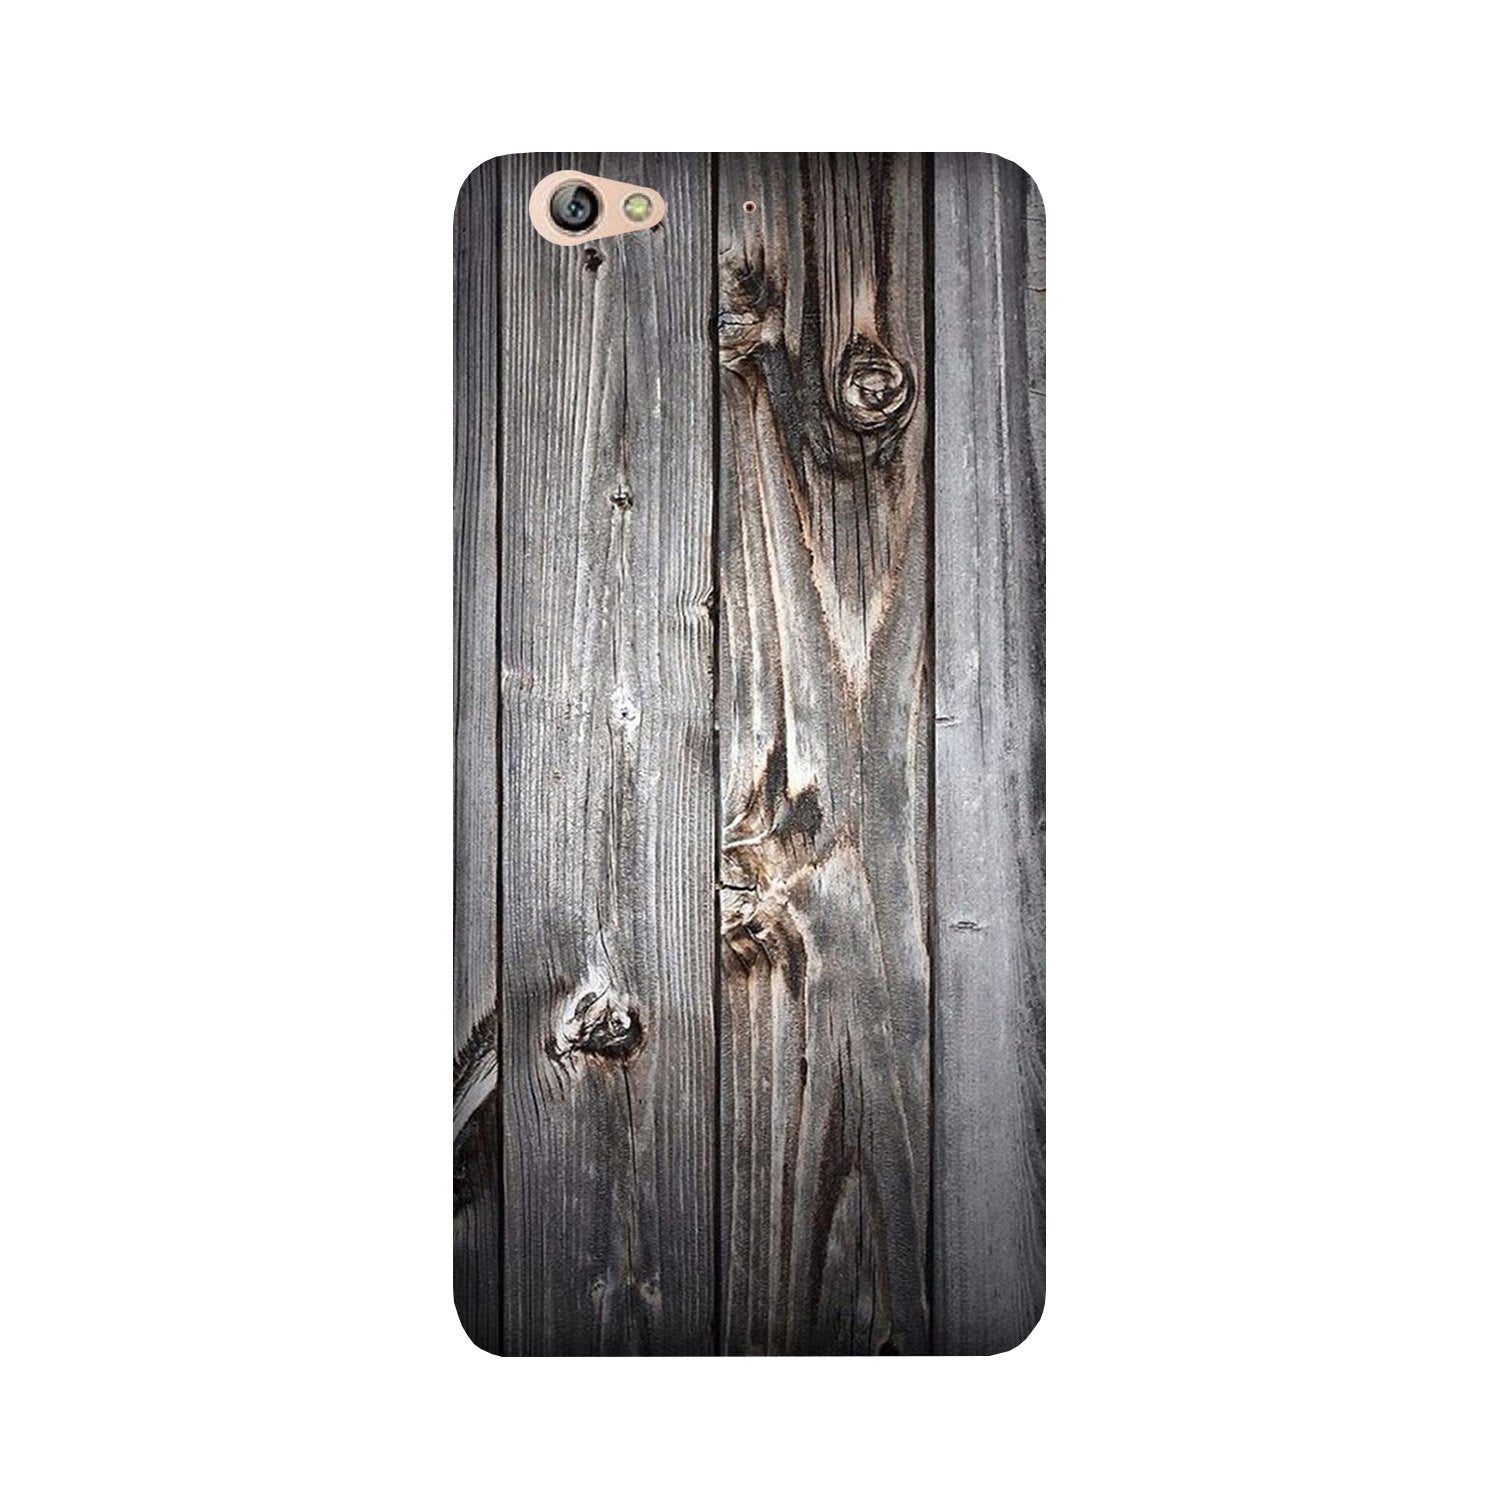 Wooden Look Case for Gionee S6(Design - 114)